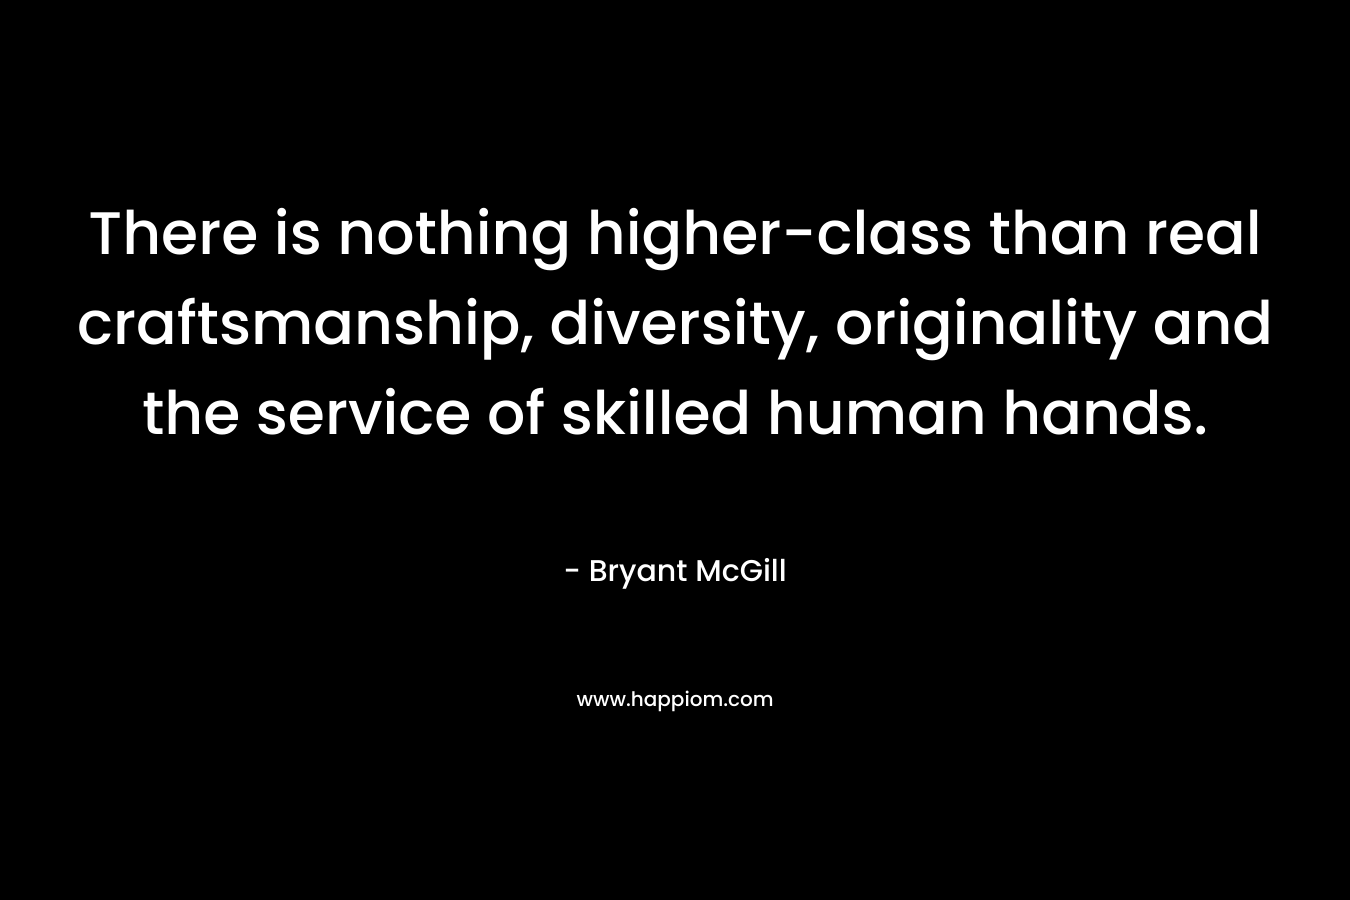 There is nothing higher-class than real craftsmanship, diversity, originality and the service of skilled human hands. – Bryant McGill